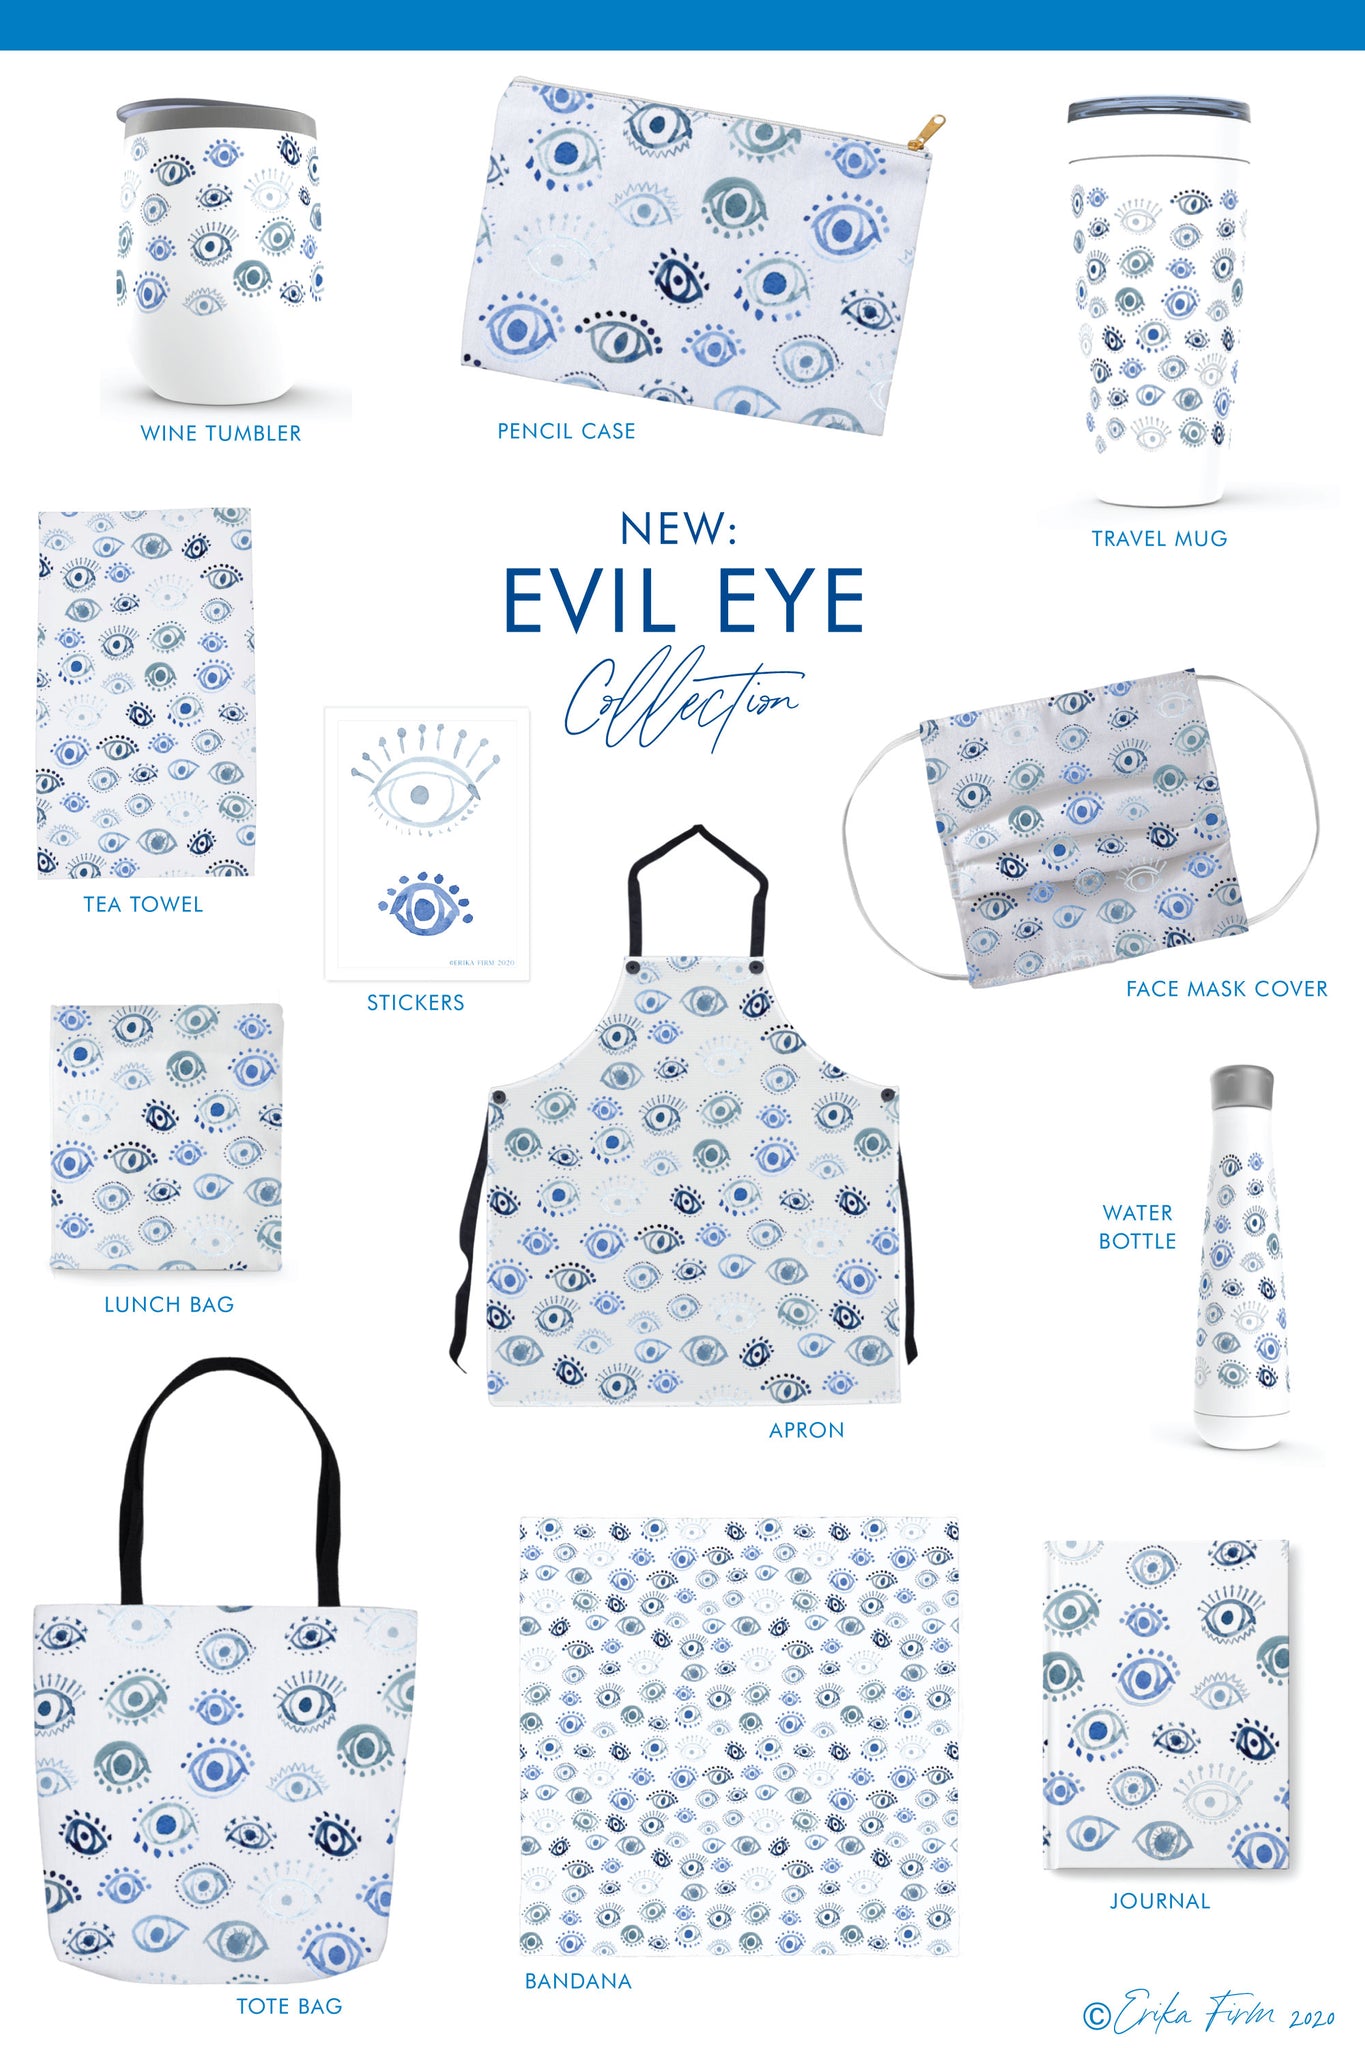 Introducing the New Evil Eye Collection by Erika Firm featuring pencil cases, drinkware, travel mugs, aprons, tea towels, tote bags, and more.